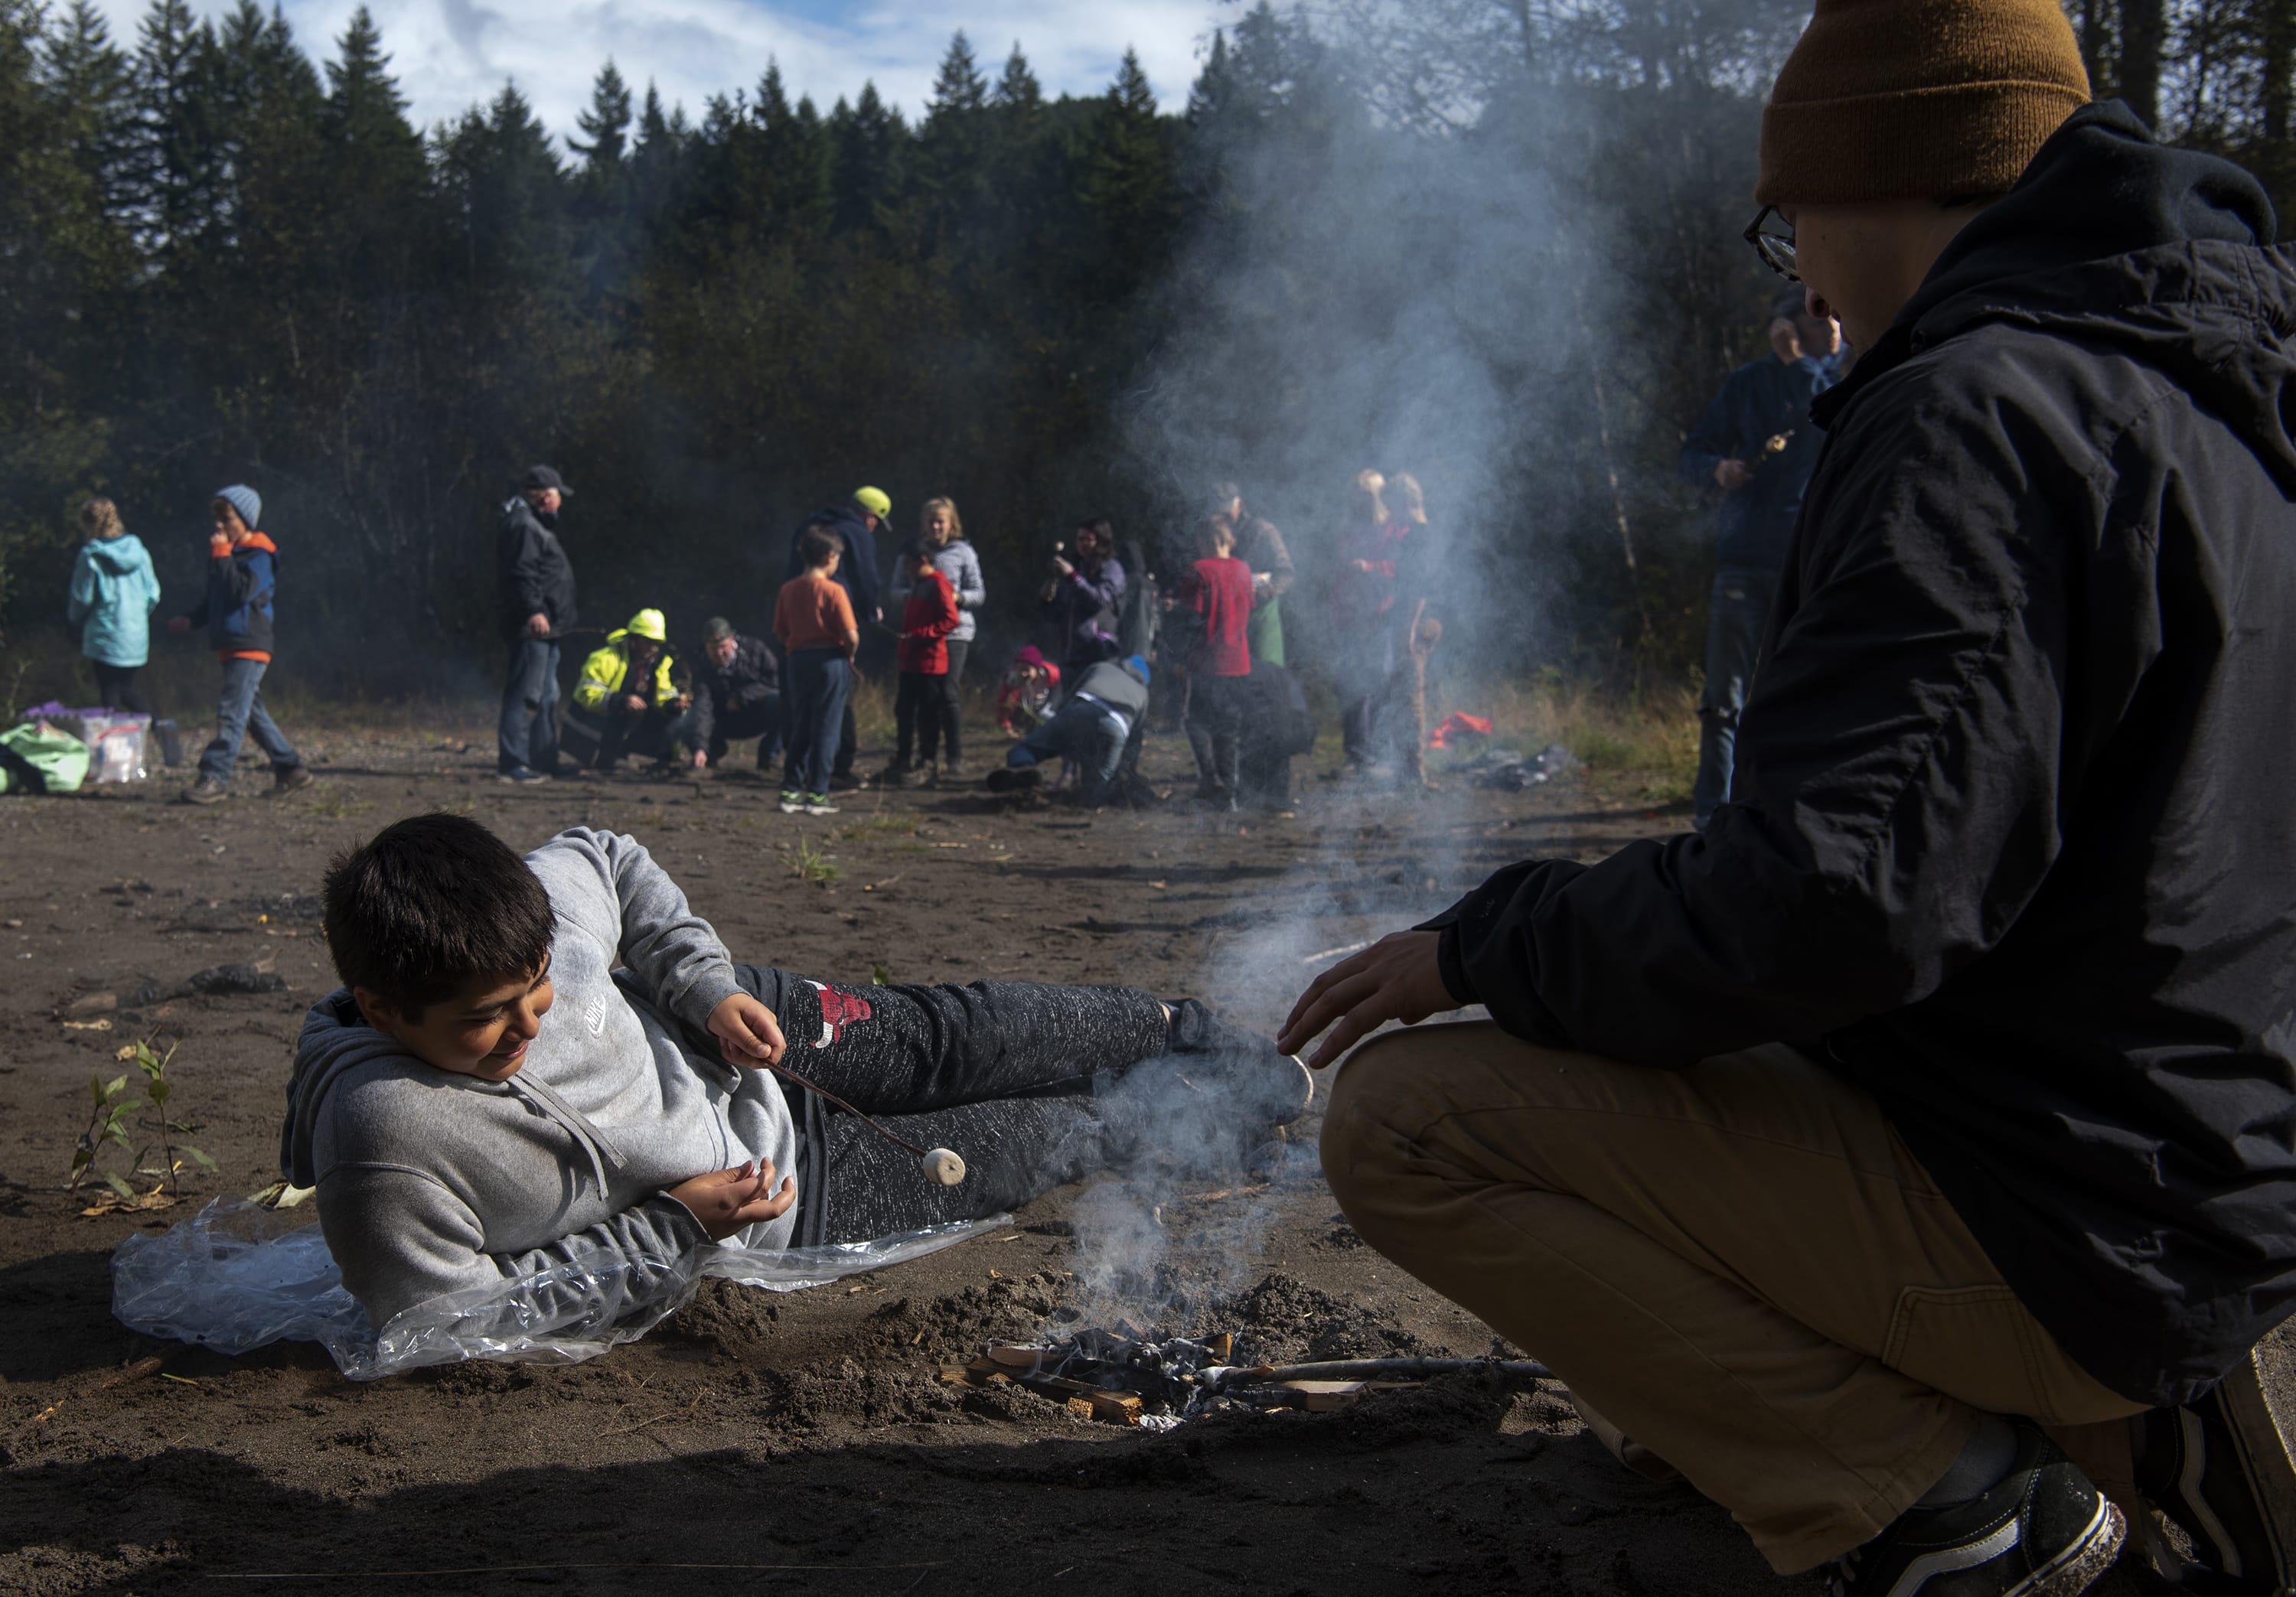 Sunset Ridge Intermediate School fifth-grader Jacob Springer, left, and Ridgefield High School senior Isaac Moreno, right, roast marshmallows and tend to a fire during the fire building workshop at the Cispus Learning Center outdoor program in Randle on Tuesday, Oct. 8, 2019. The students had workshops and field study sessions covering topics like astronomy, geology, nature writing, and outdoor survival skills.